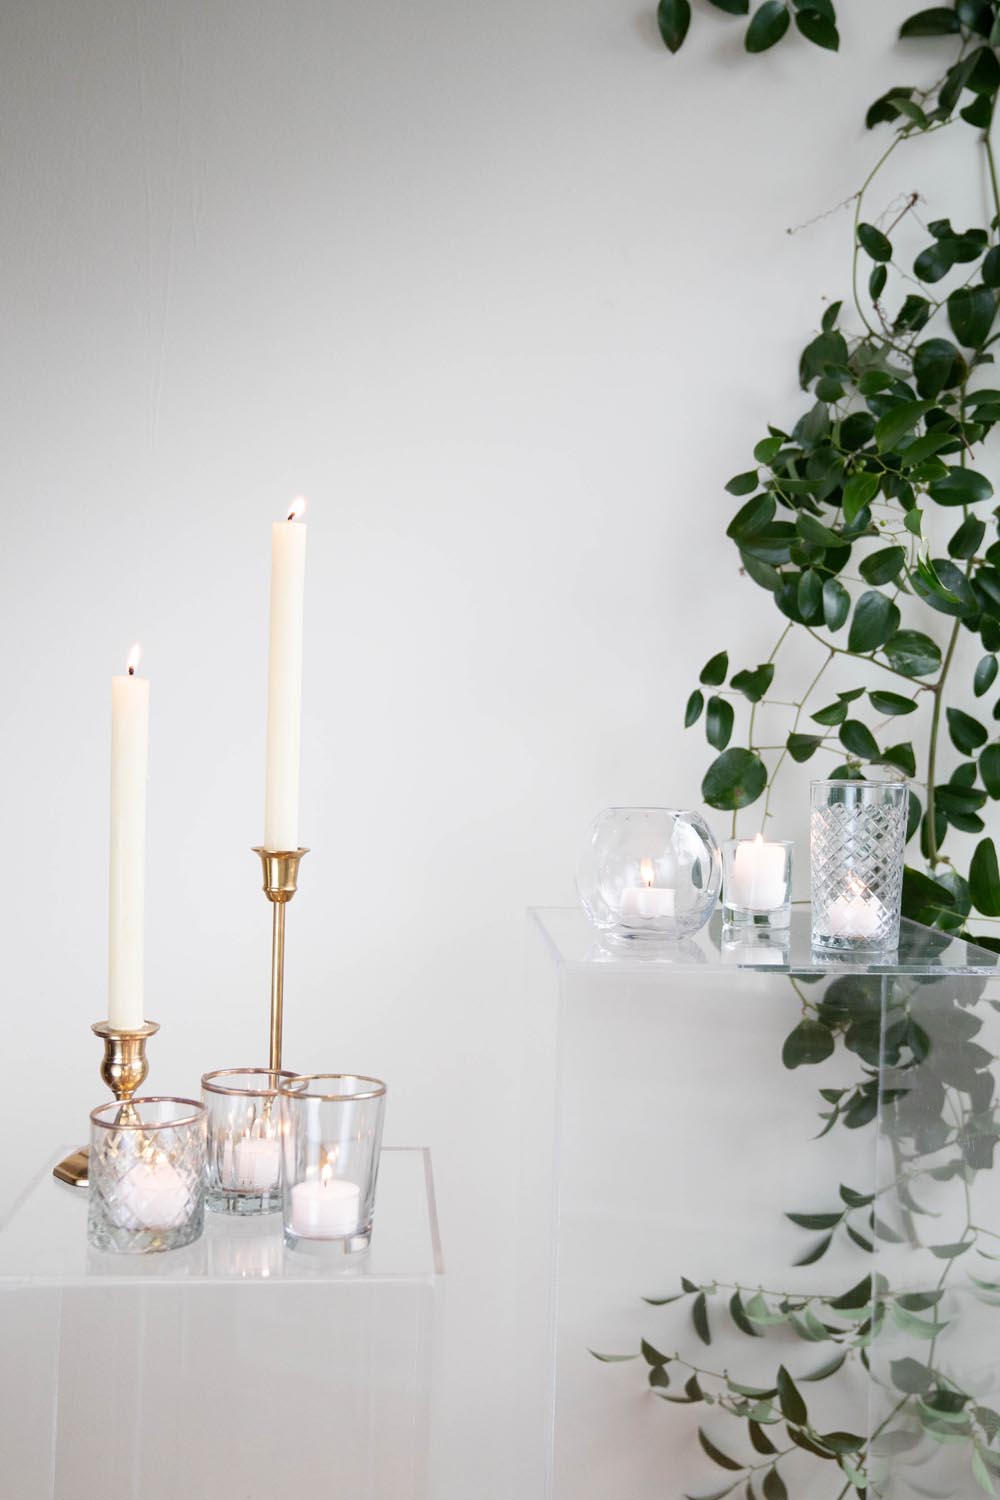 Clear glass candle holders